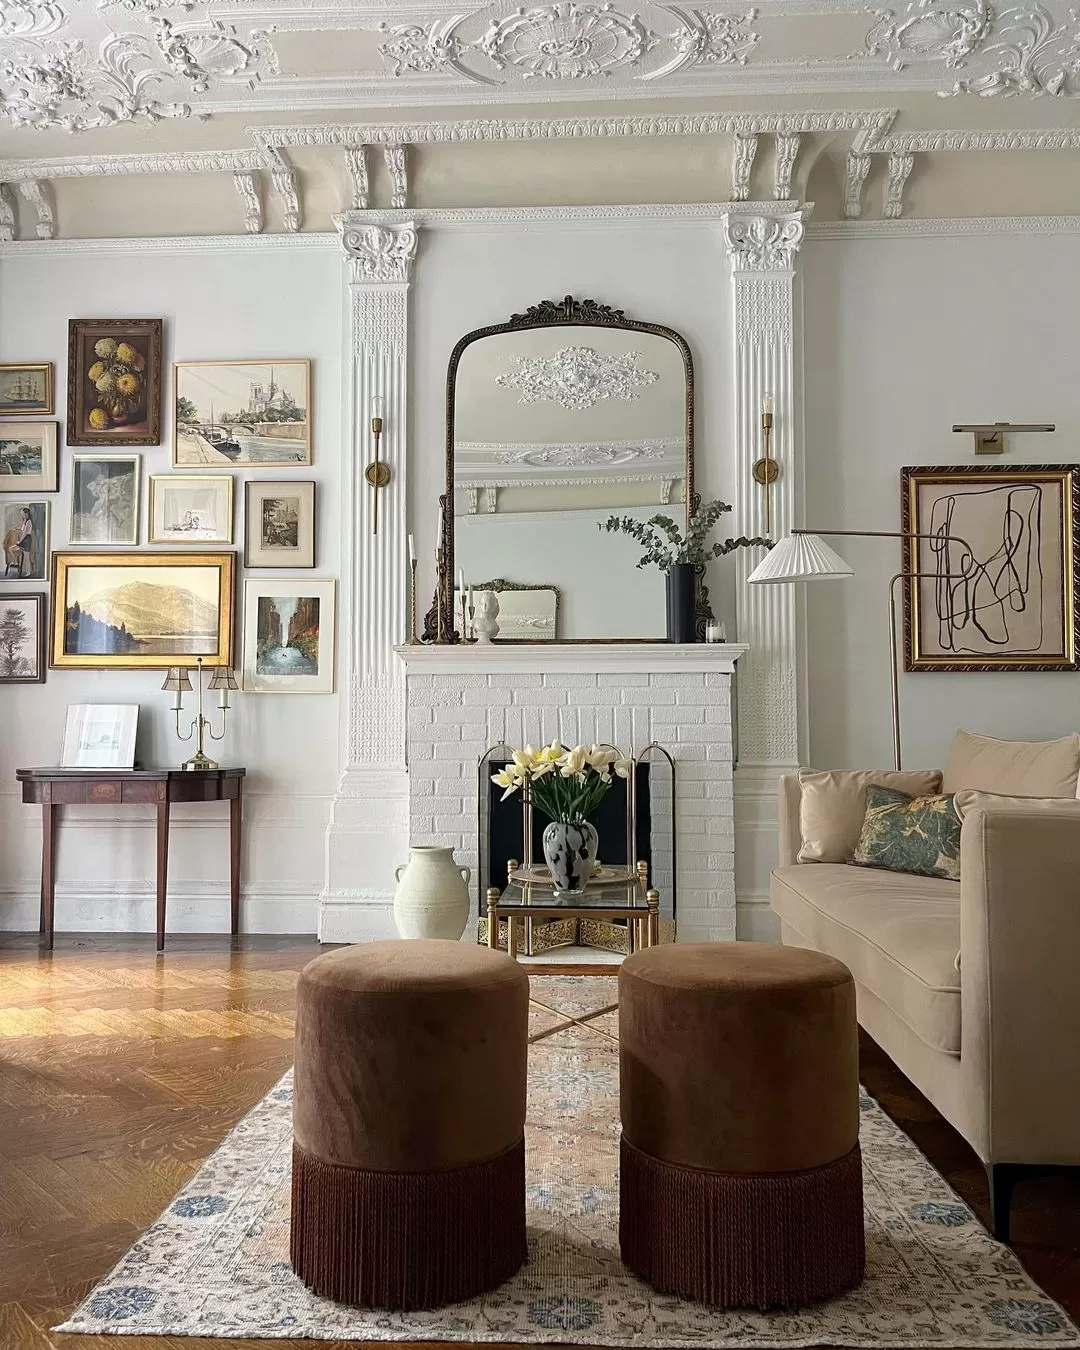 Timeless Interior Design: How to Decorate A Home With Enduring Style